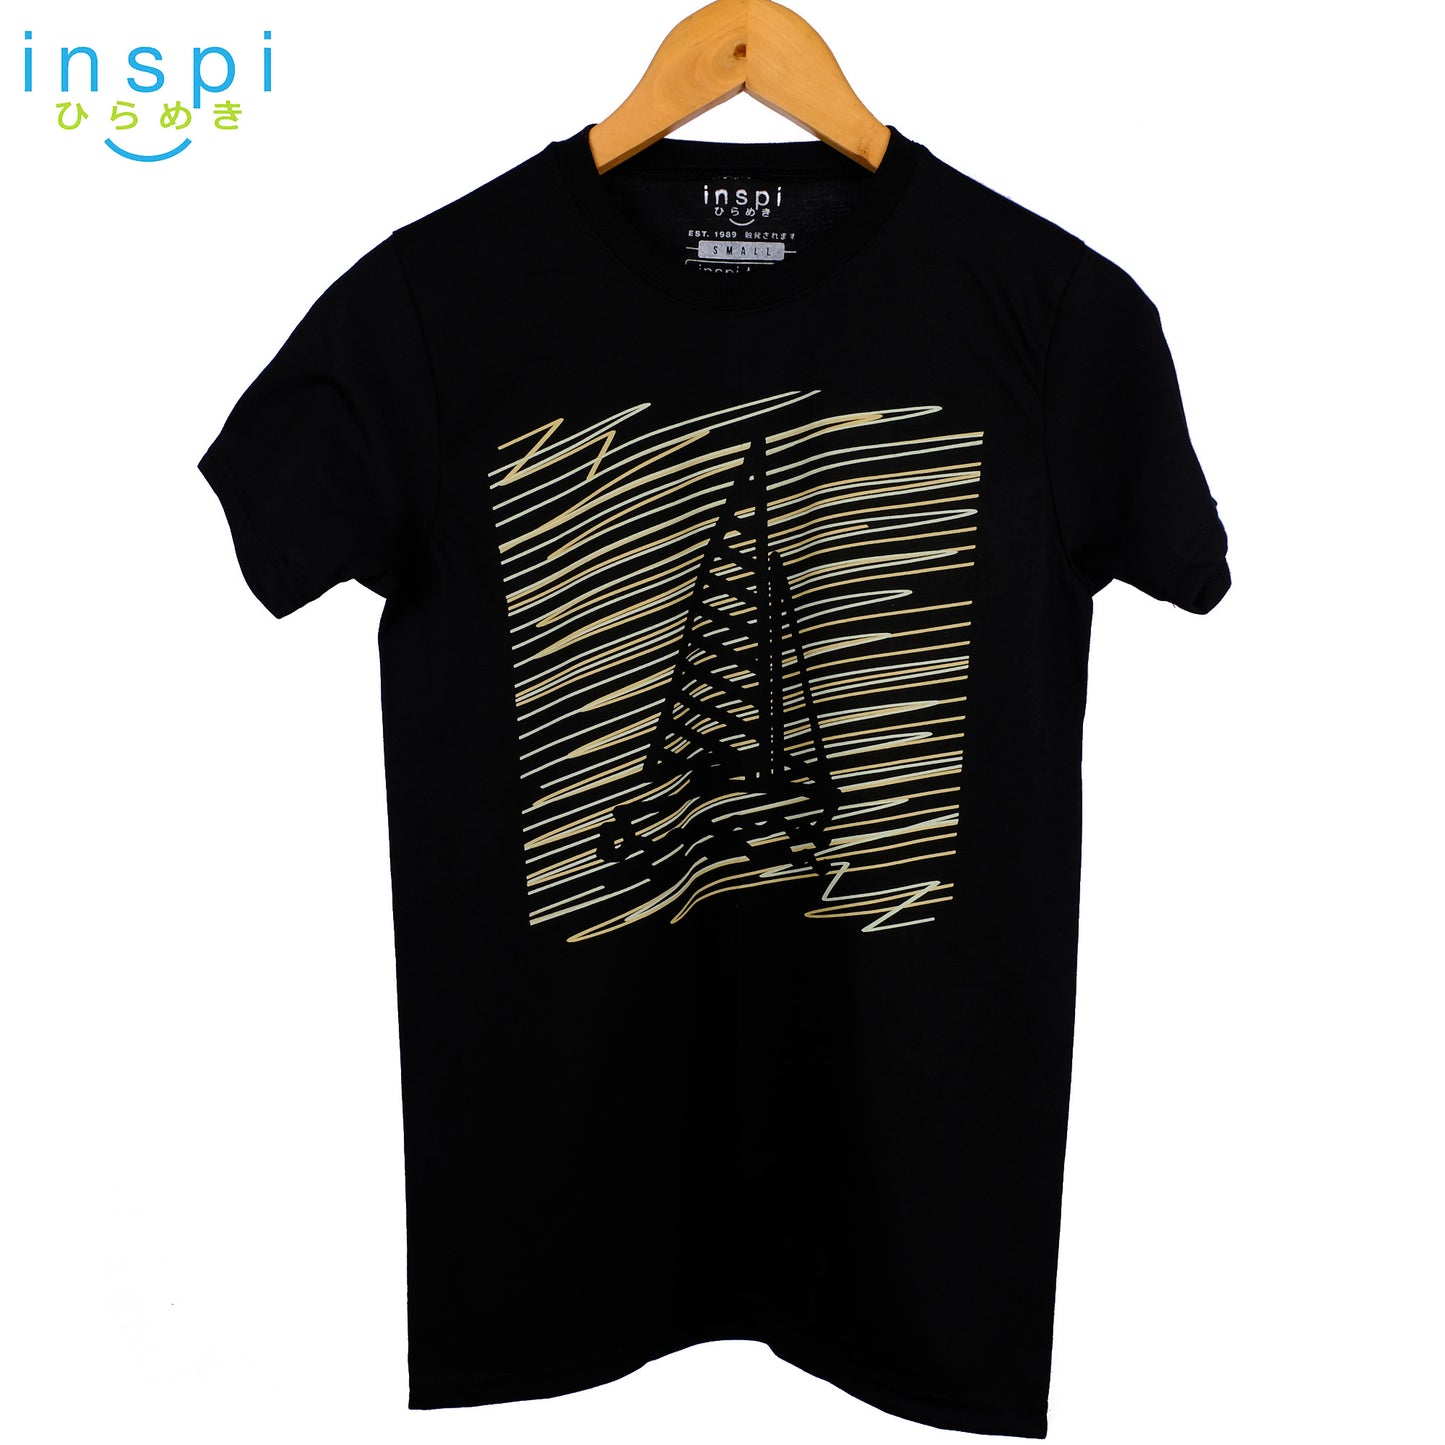 INSPI Tees Doodle Boat Graphic Tshirt